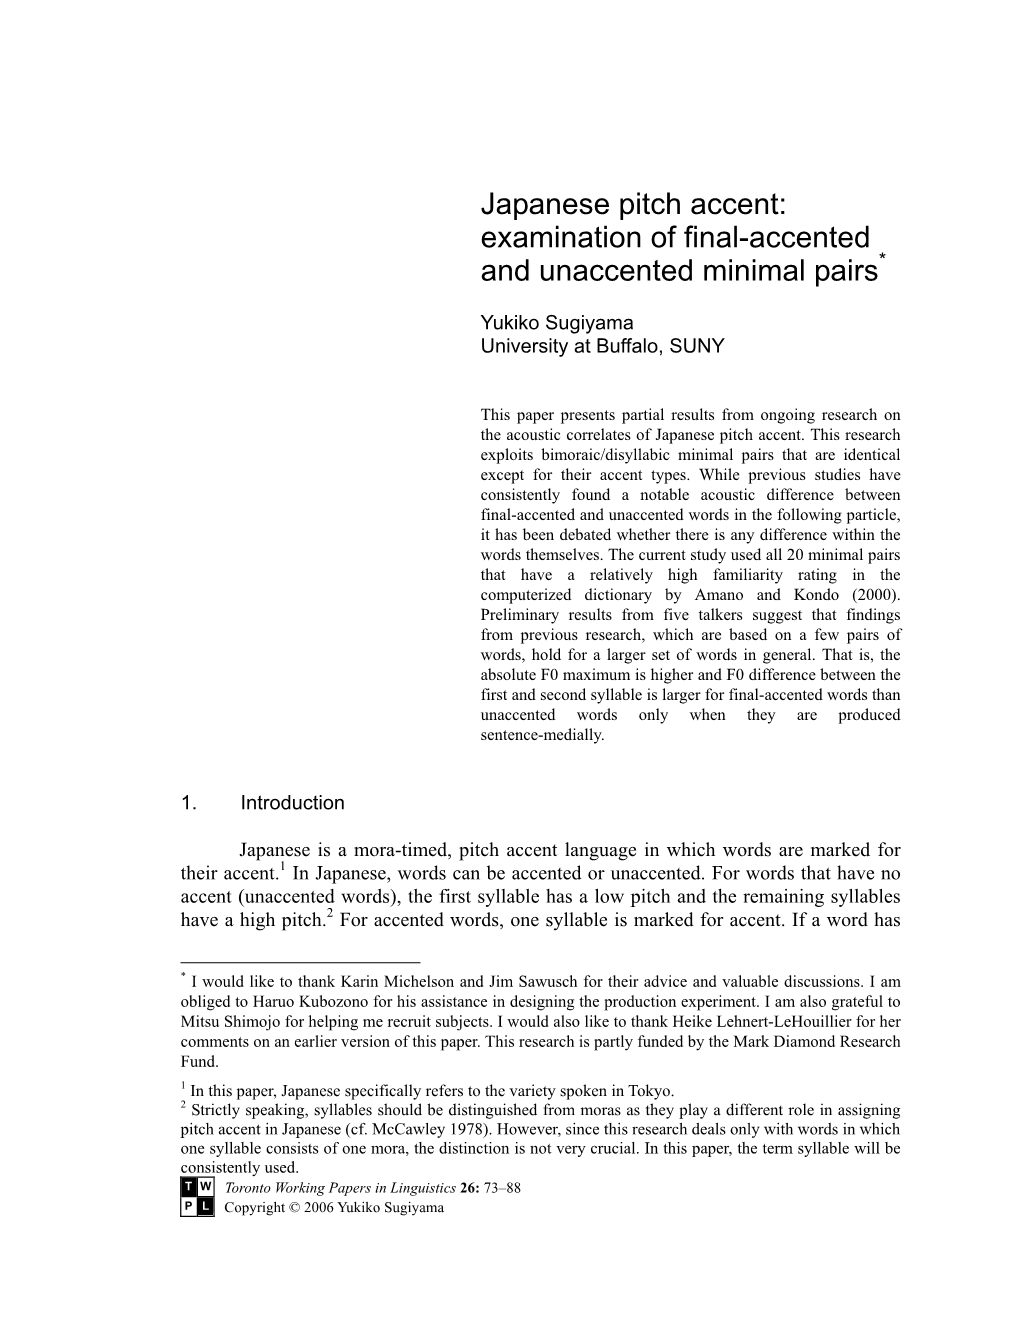 Japanese Pitch Accent: Examination of Final-Accented and Unaccented Minimal Pairs*